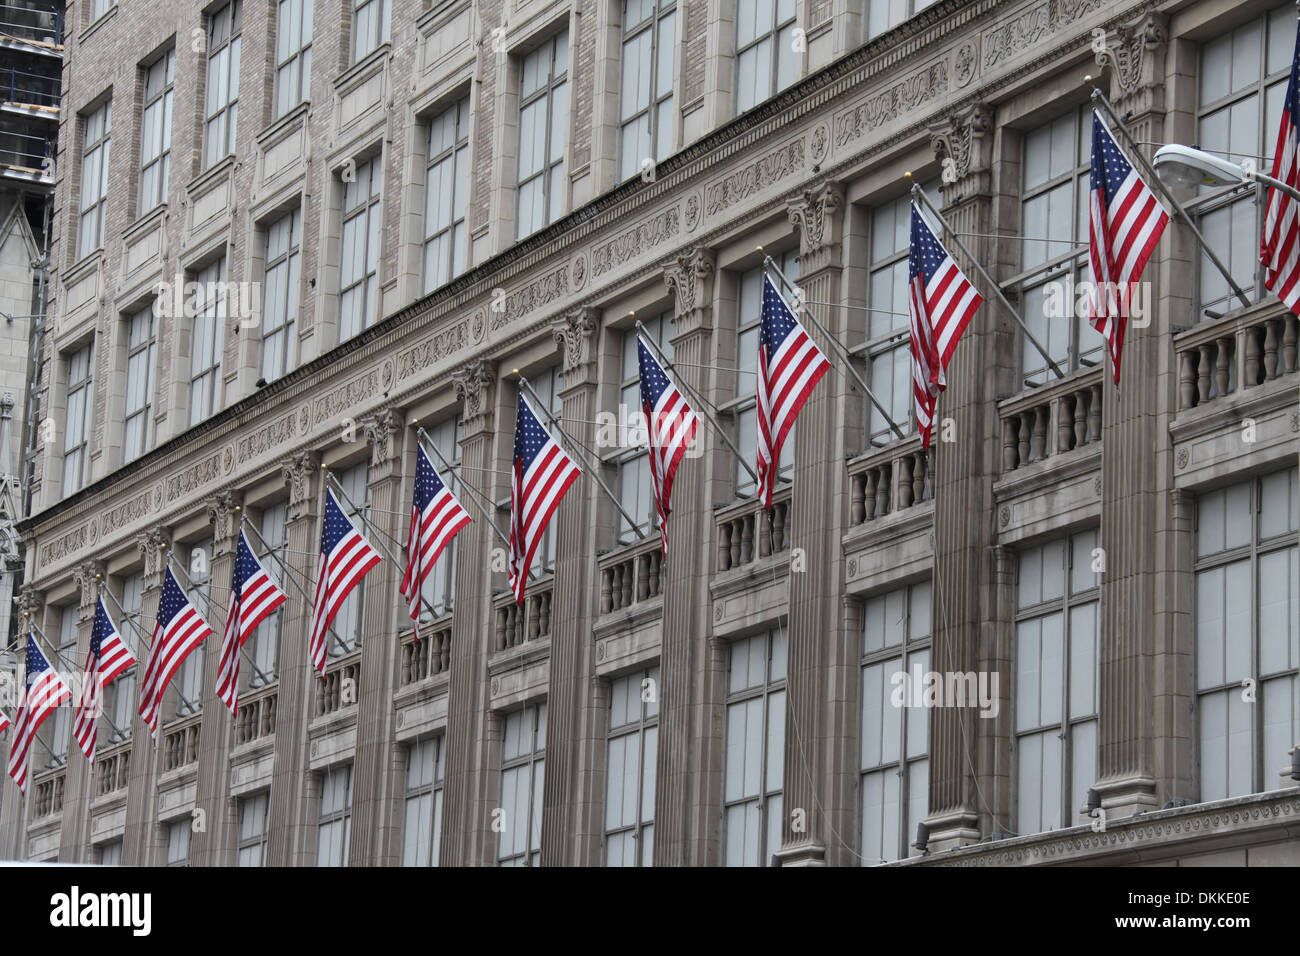 Saks Building on 5th Avenue in New York City Stock Photo - Alamy